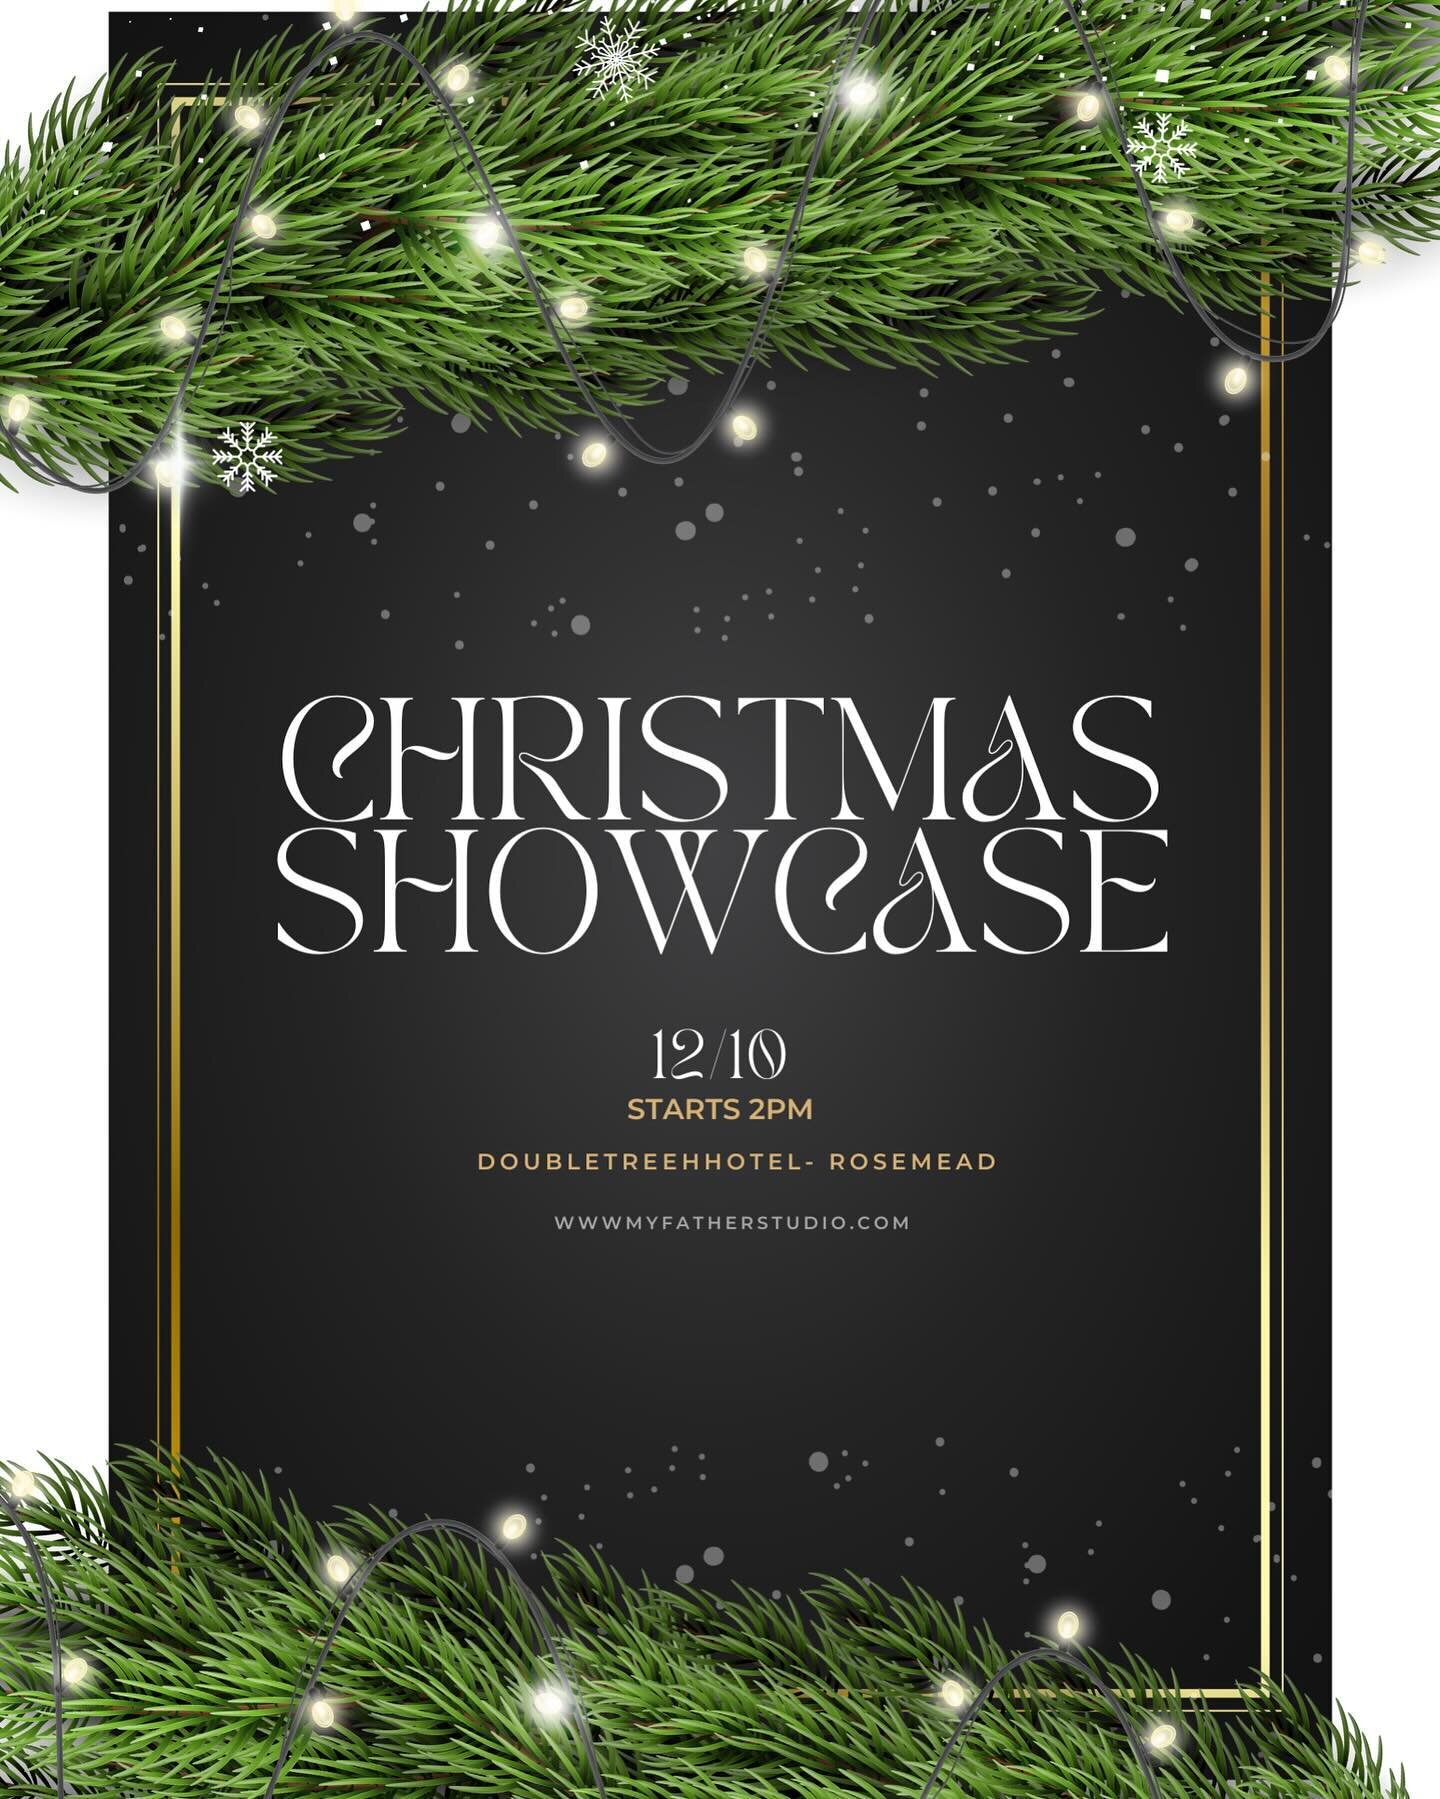 🎵 Join us for an enchanting celebration at my father's studio's Christmas Showcase on December 10th at 2 PM! 🎄🎤 Experience the magic of the season with incredible singing and joyful vibes. Save the date and let's make this Christmas melodious and 